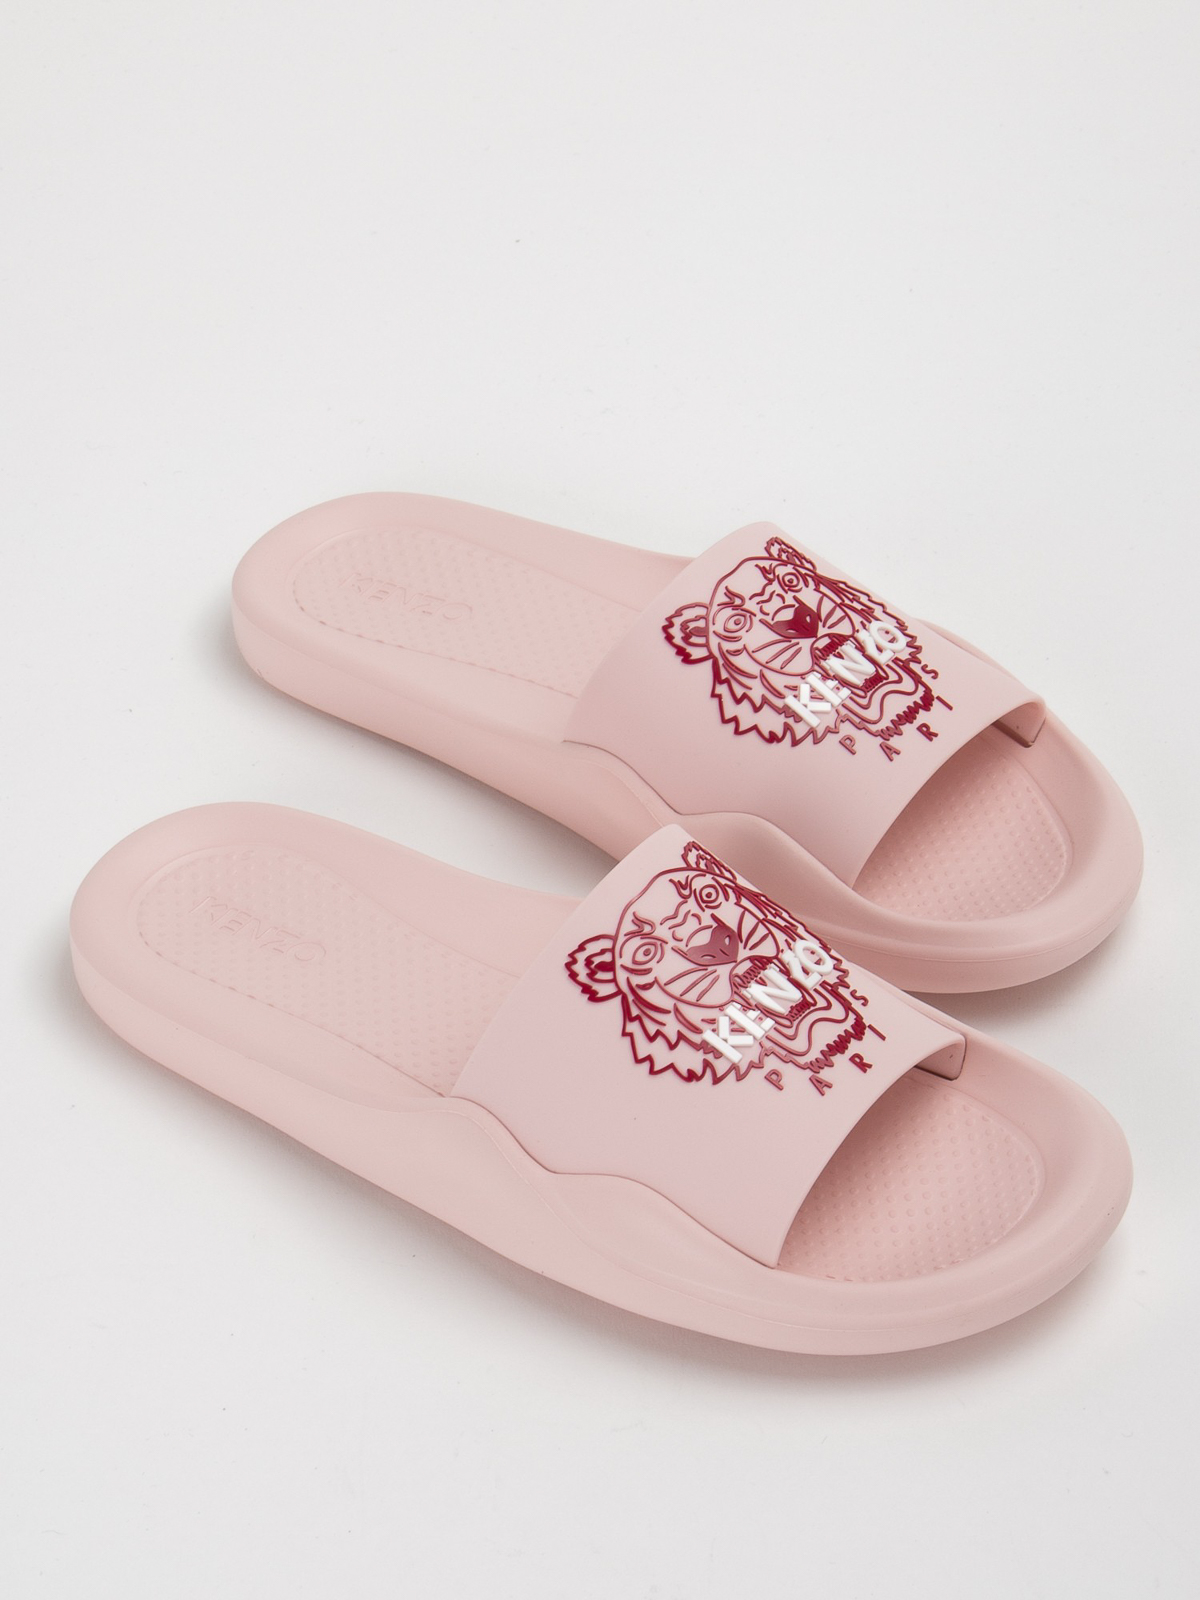 Flip flops Kenzo - Slippers - FC52MU104P6034A | Shop online at THEBS